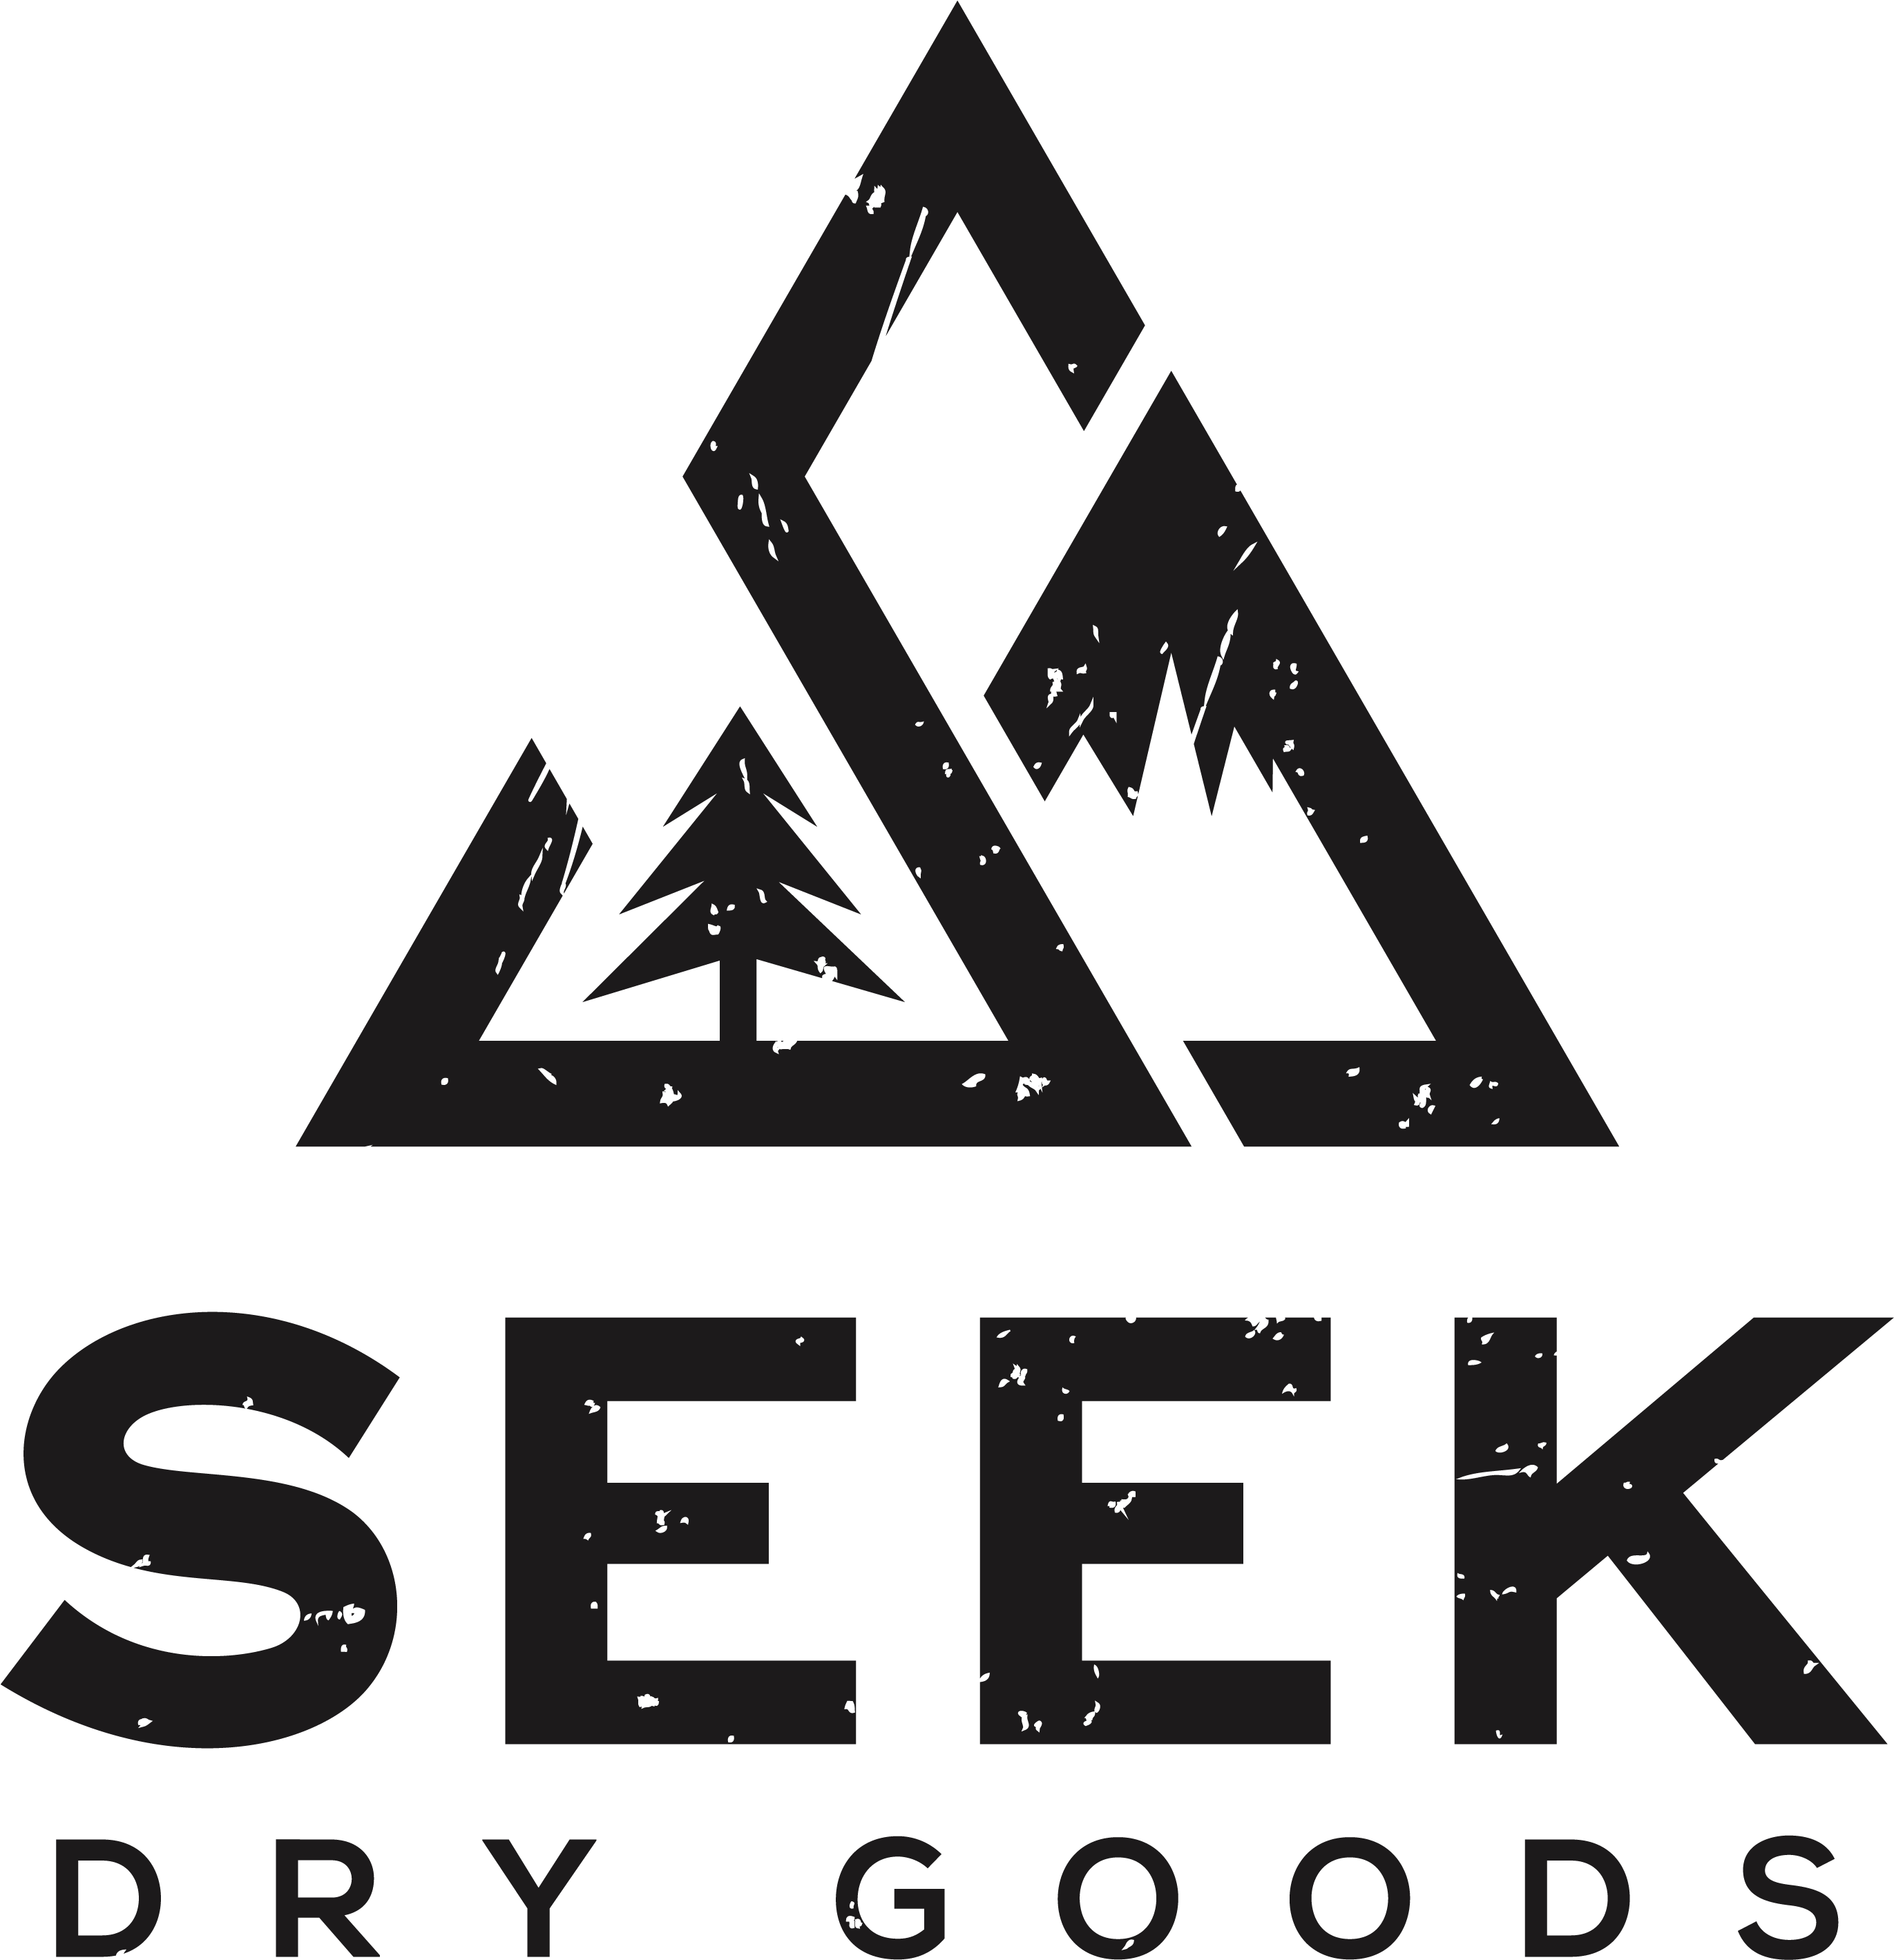 A Logo With A Triangle And Trees